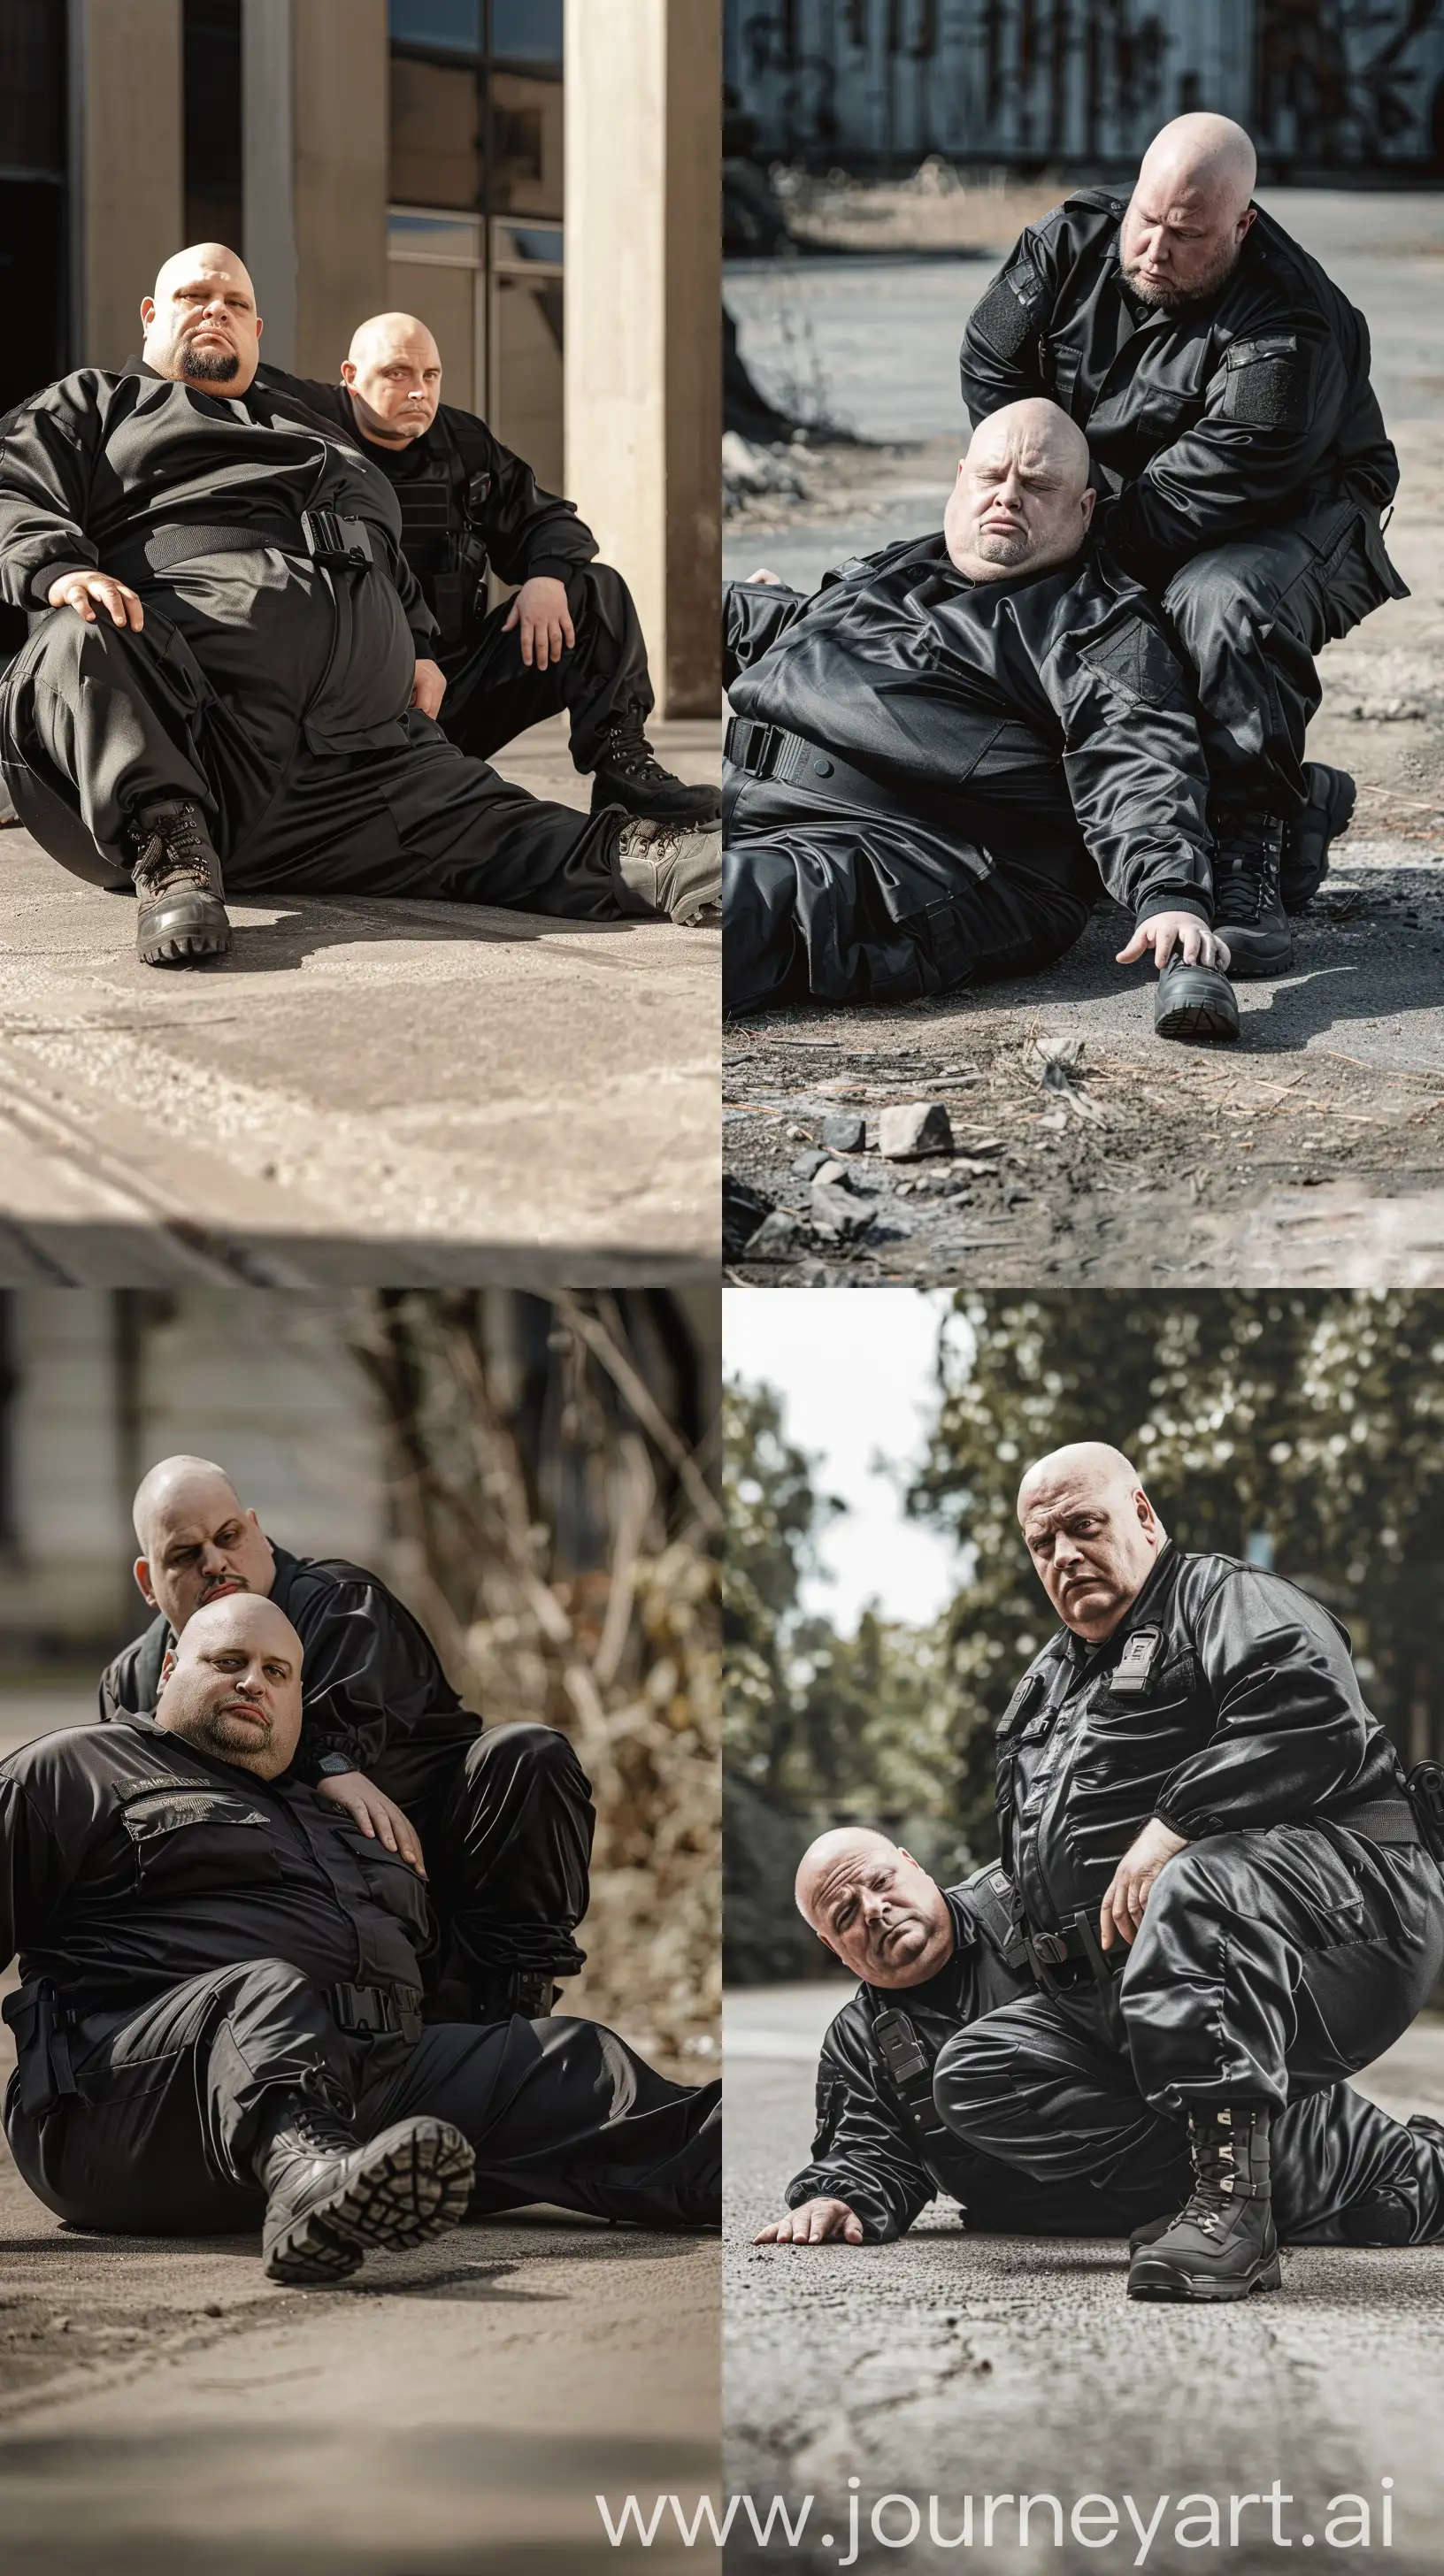 Two-Bald-Men-in-Black-Security-Guard-Outfits-Outdoors